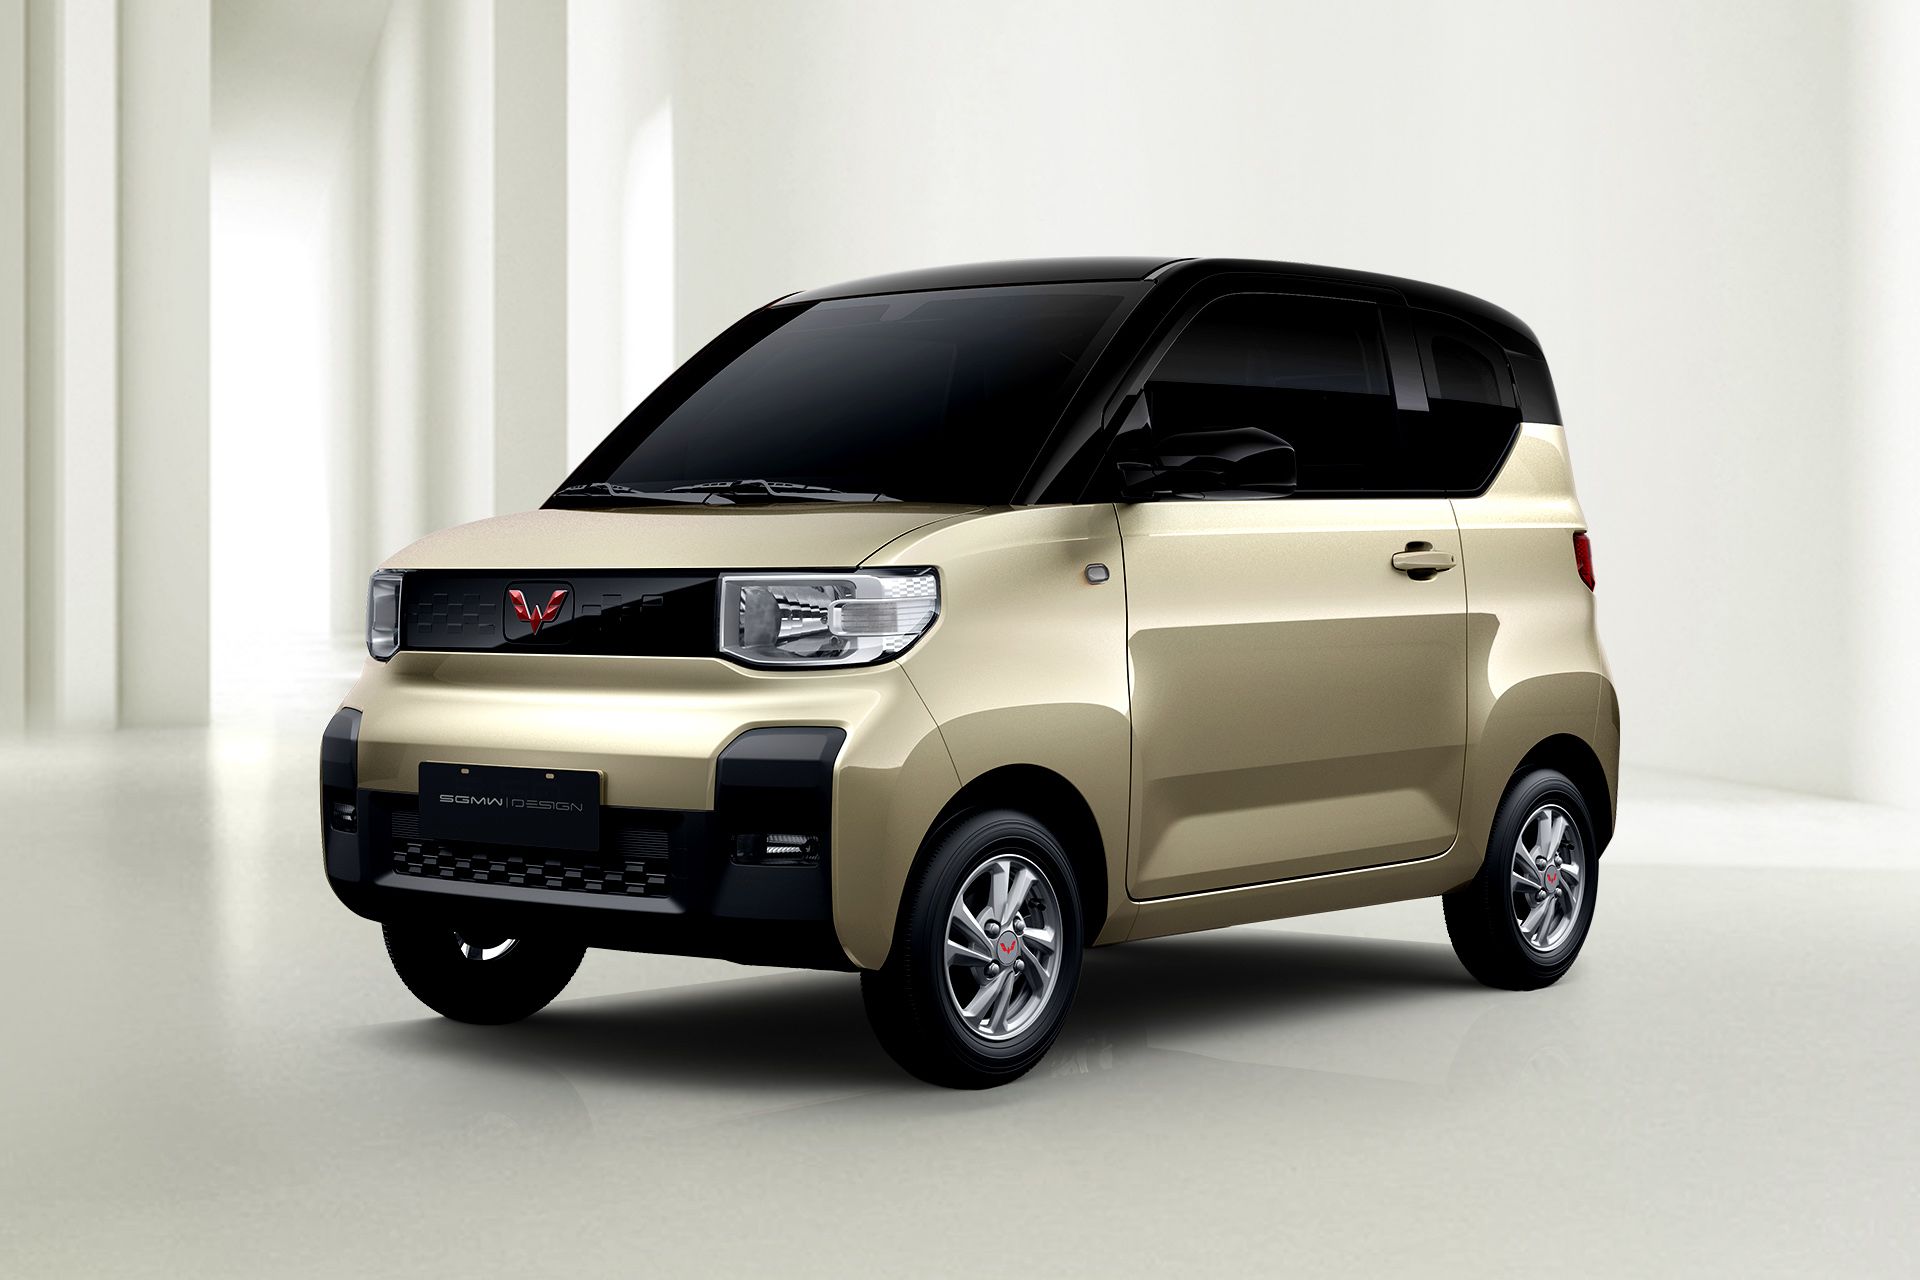 The Wuling EV Takes After Kei